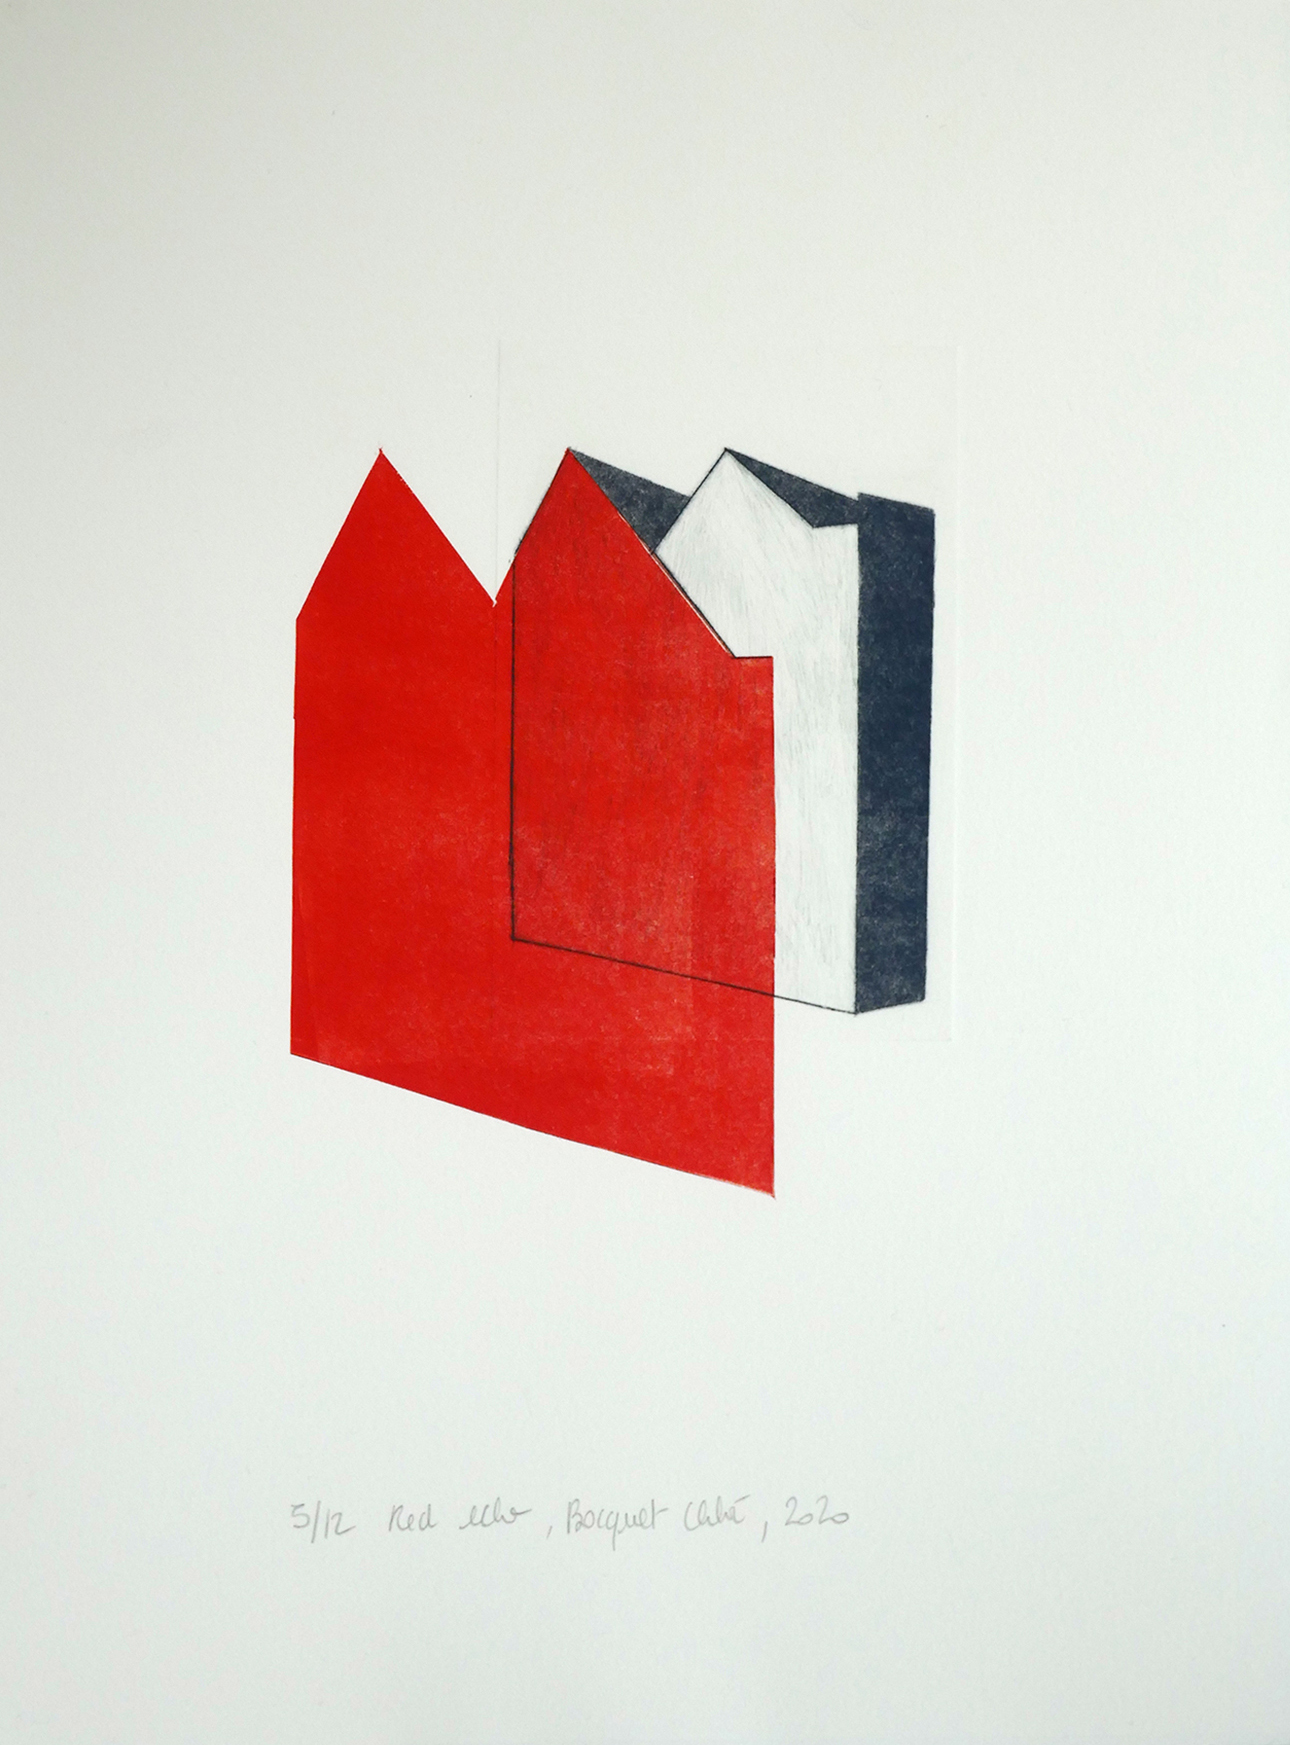 Red echo, 2020, drypoint and monotype, image and paper size 38x28 cm, edition of 12